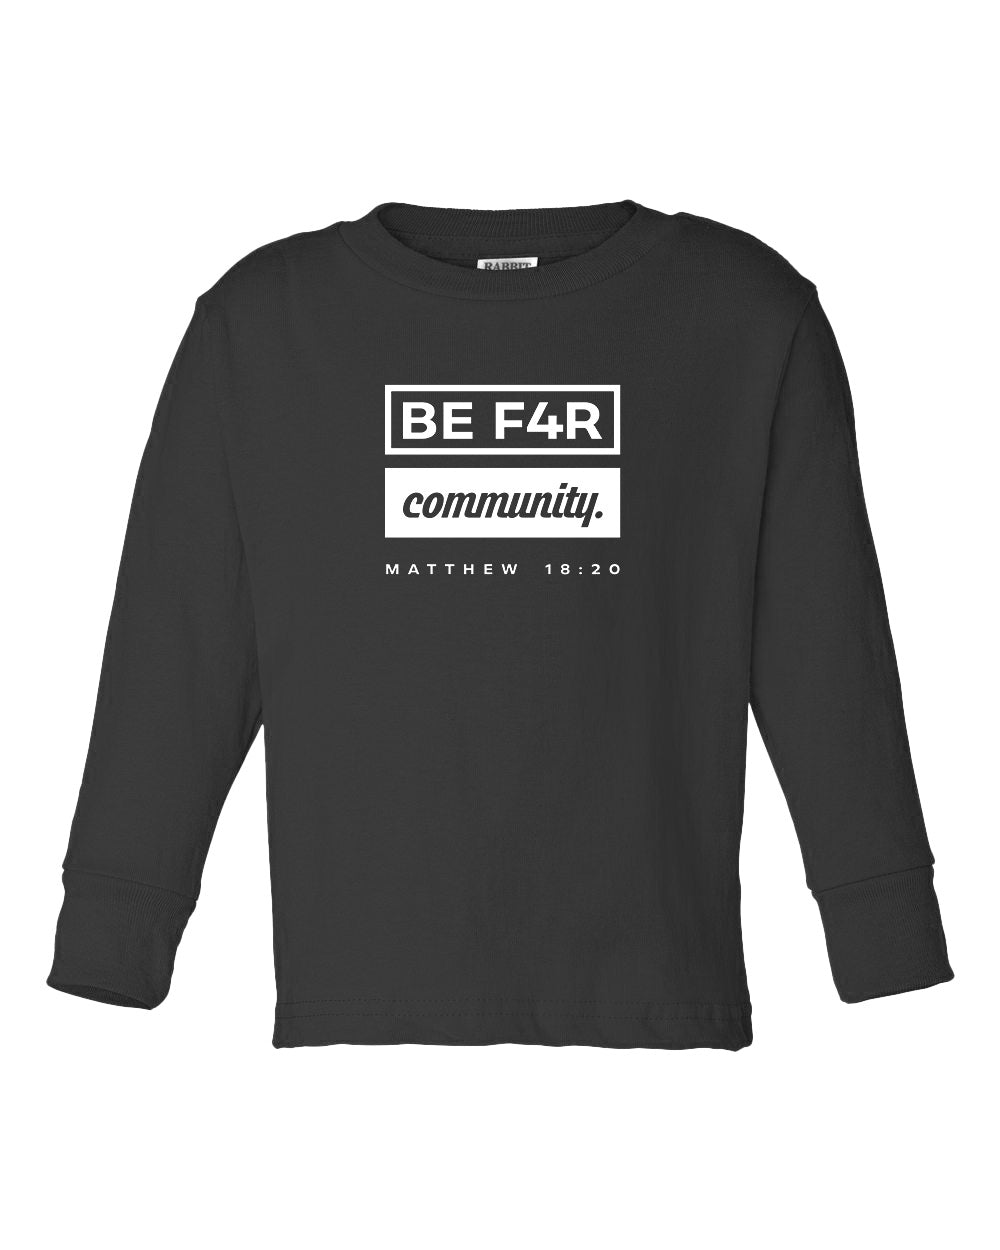 BE F4R Community 2 Toddler Long Sleeve